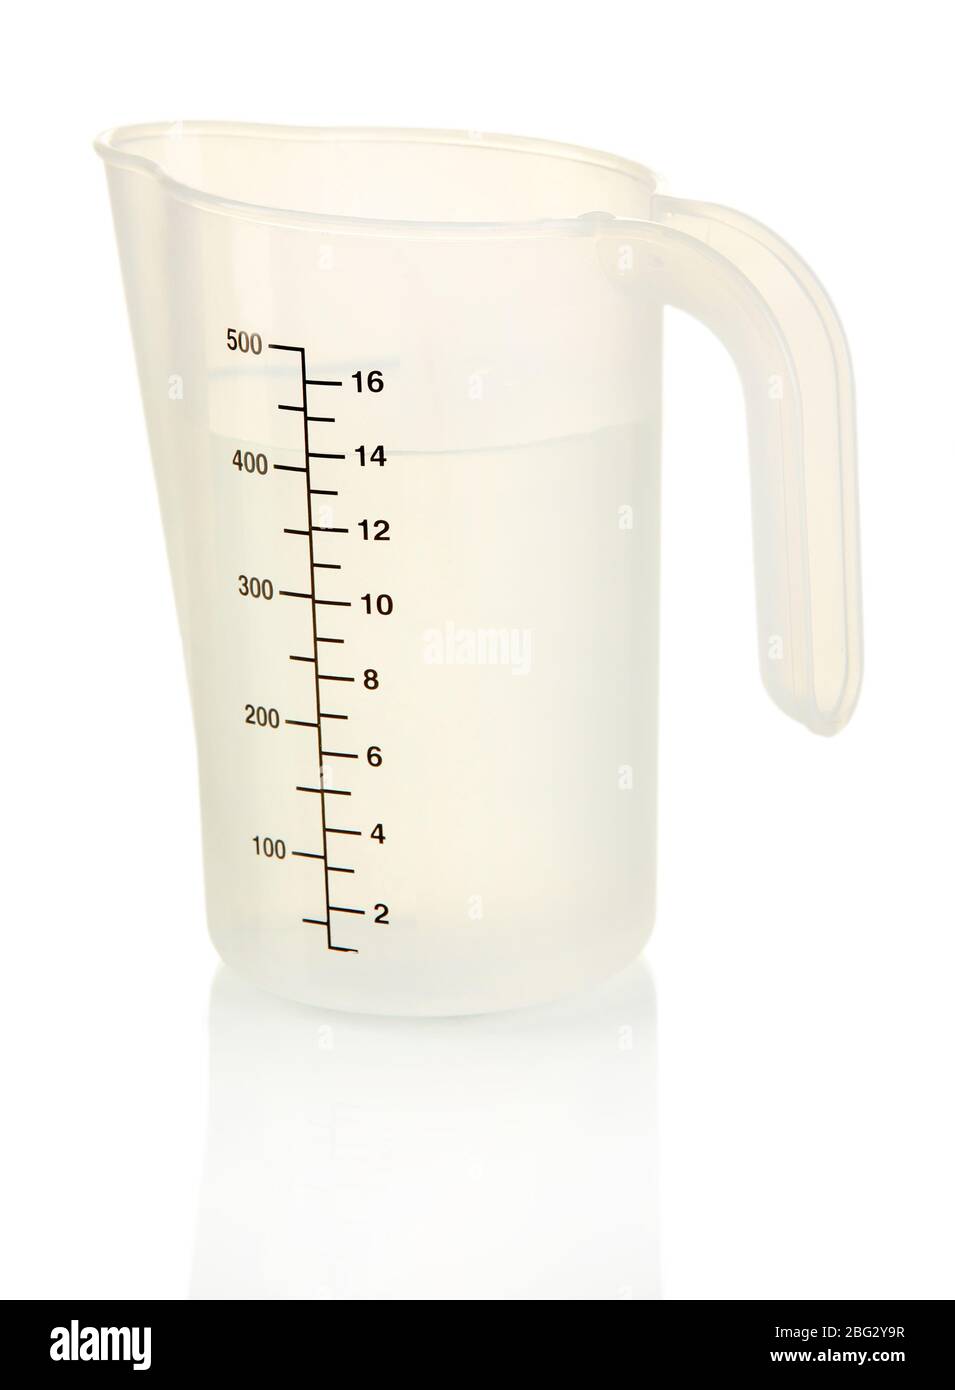 https://c8.alamy.com/comp/2BG2Y9R/measuring-cup-with-water-isolated-on-white-2BG2Y9R.jpg